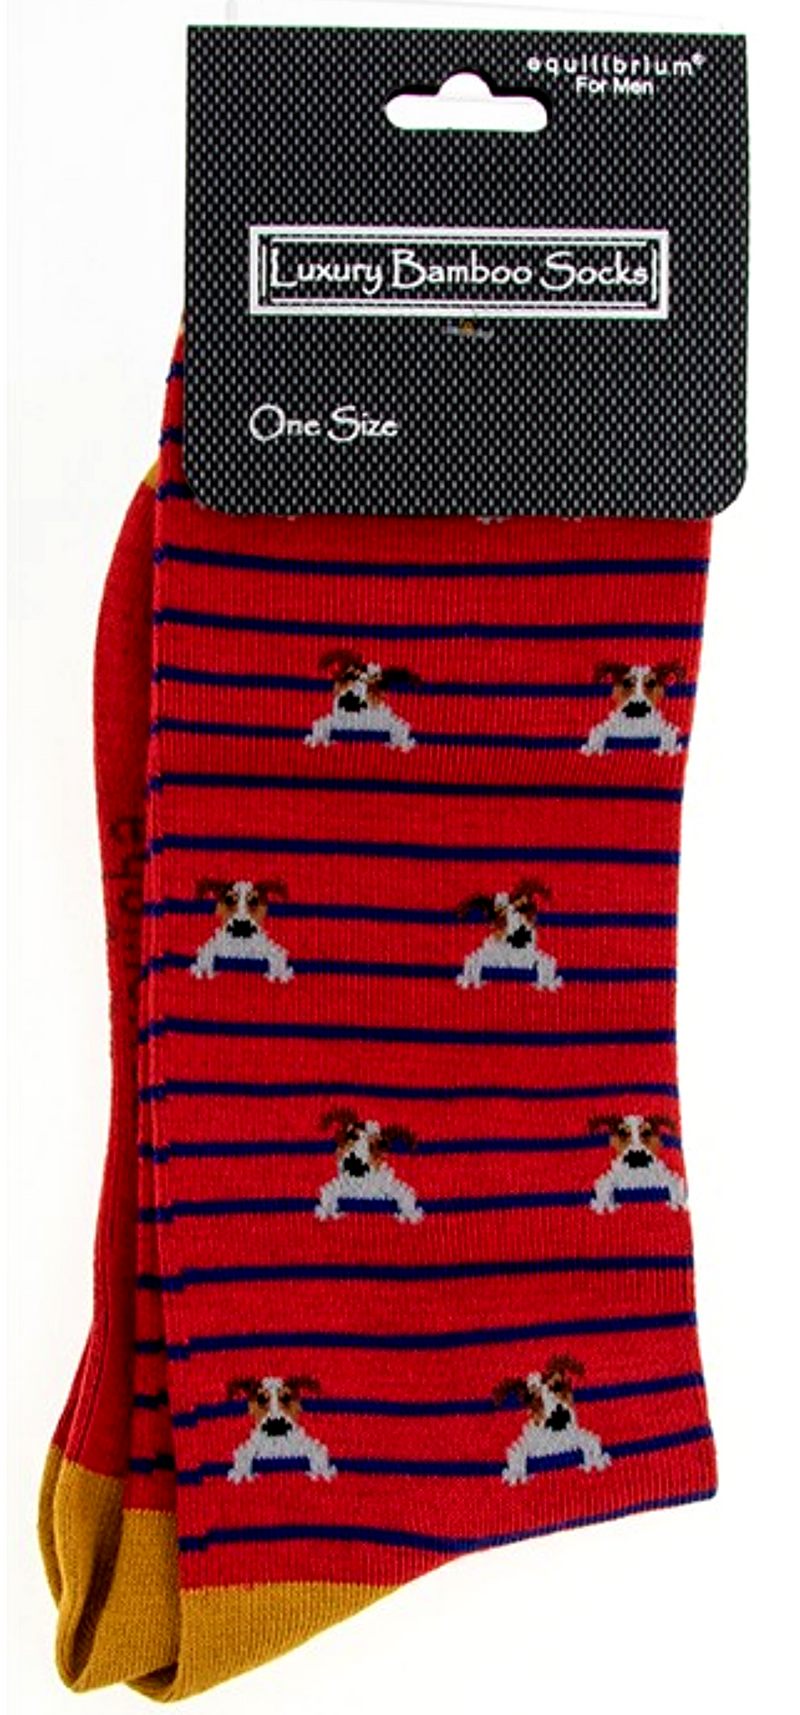 Men's quality Bamboo 'Pooch' Jack Russell socks in Grey or Red